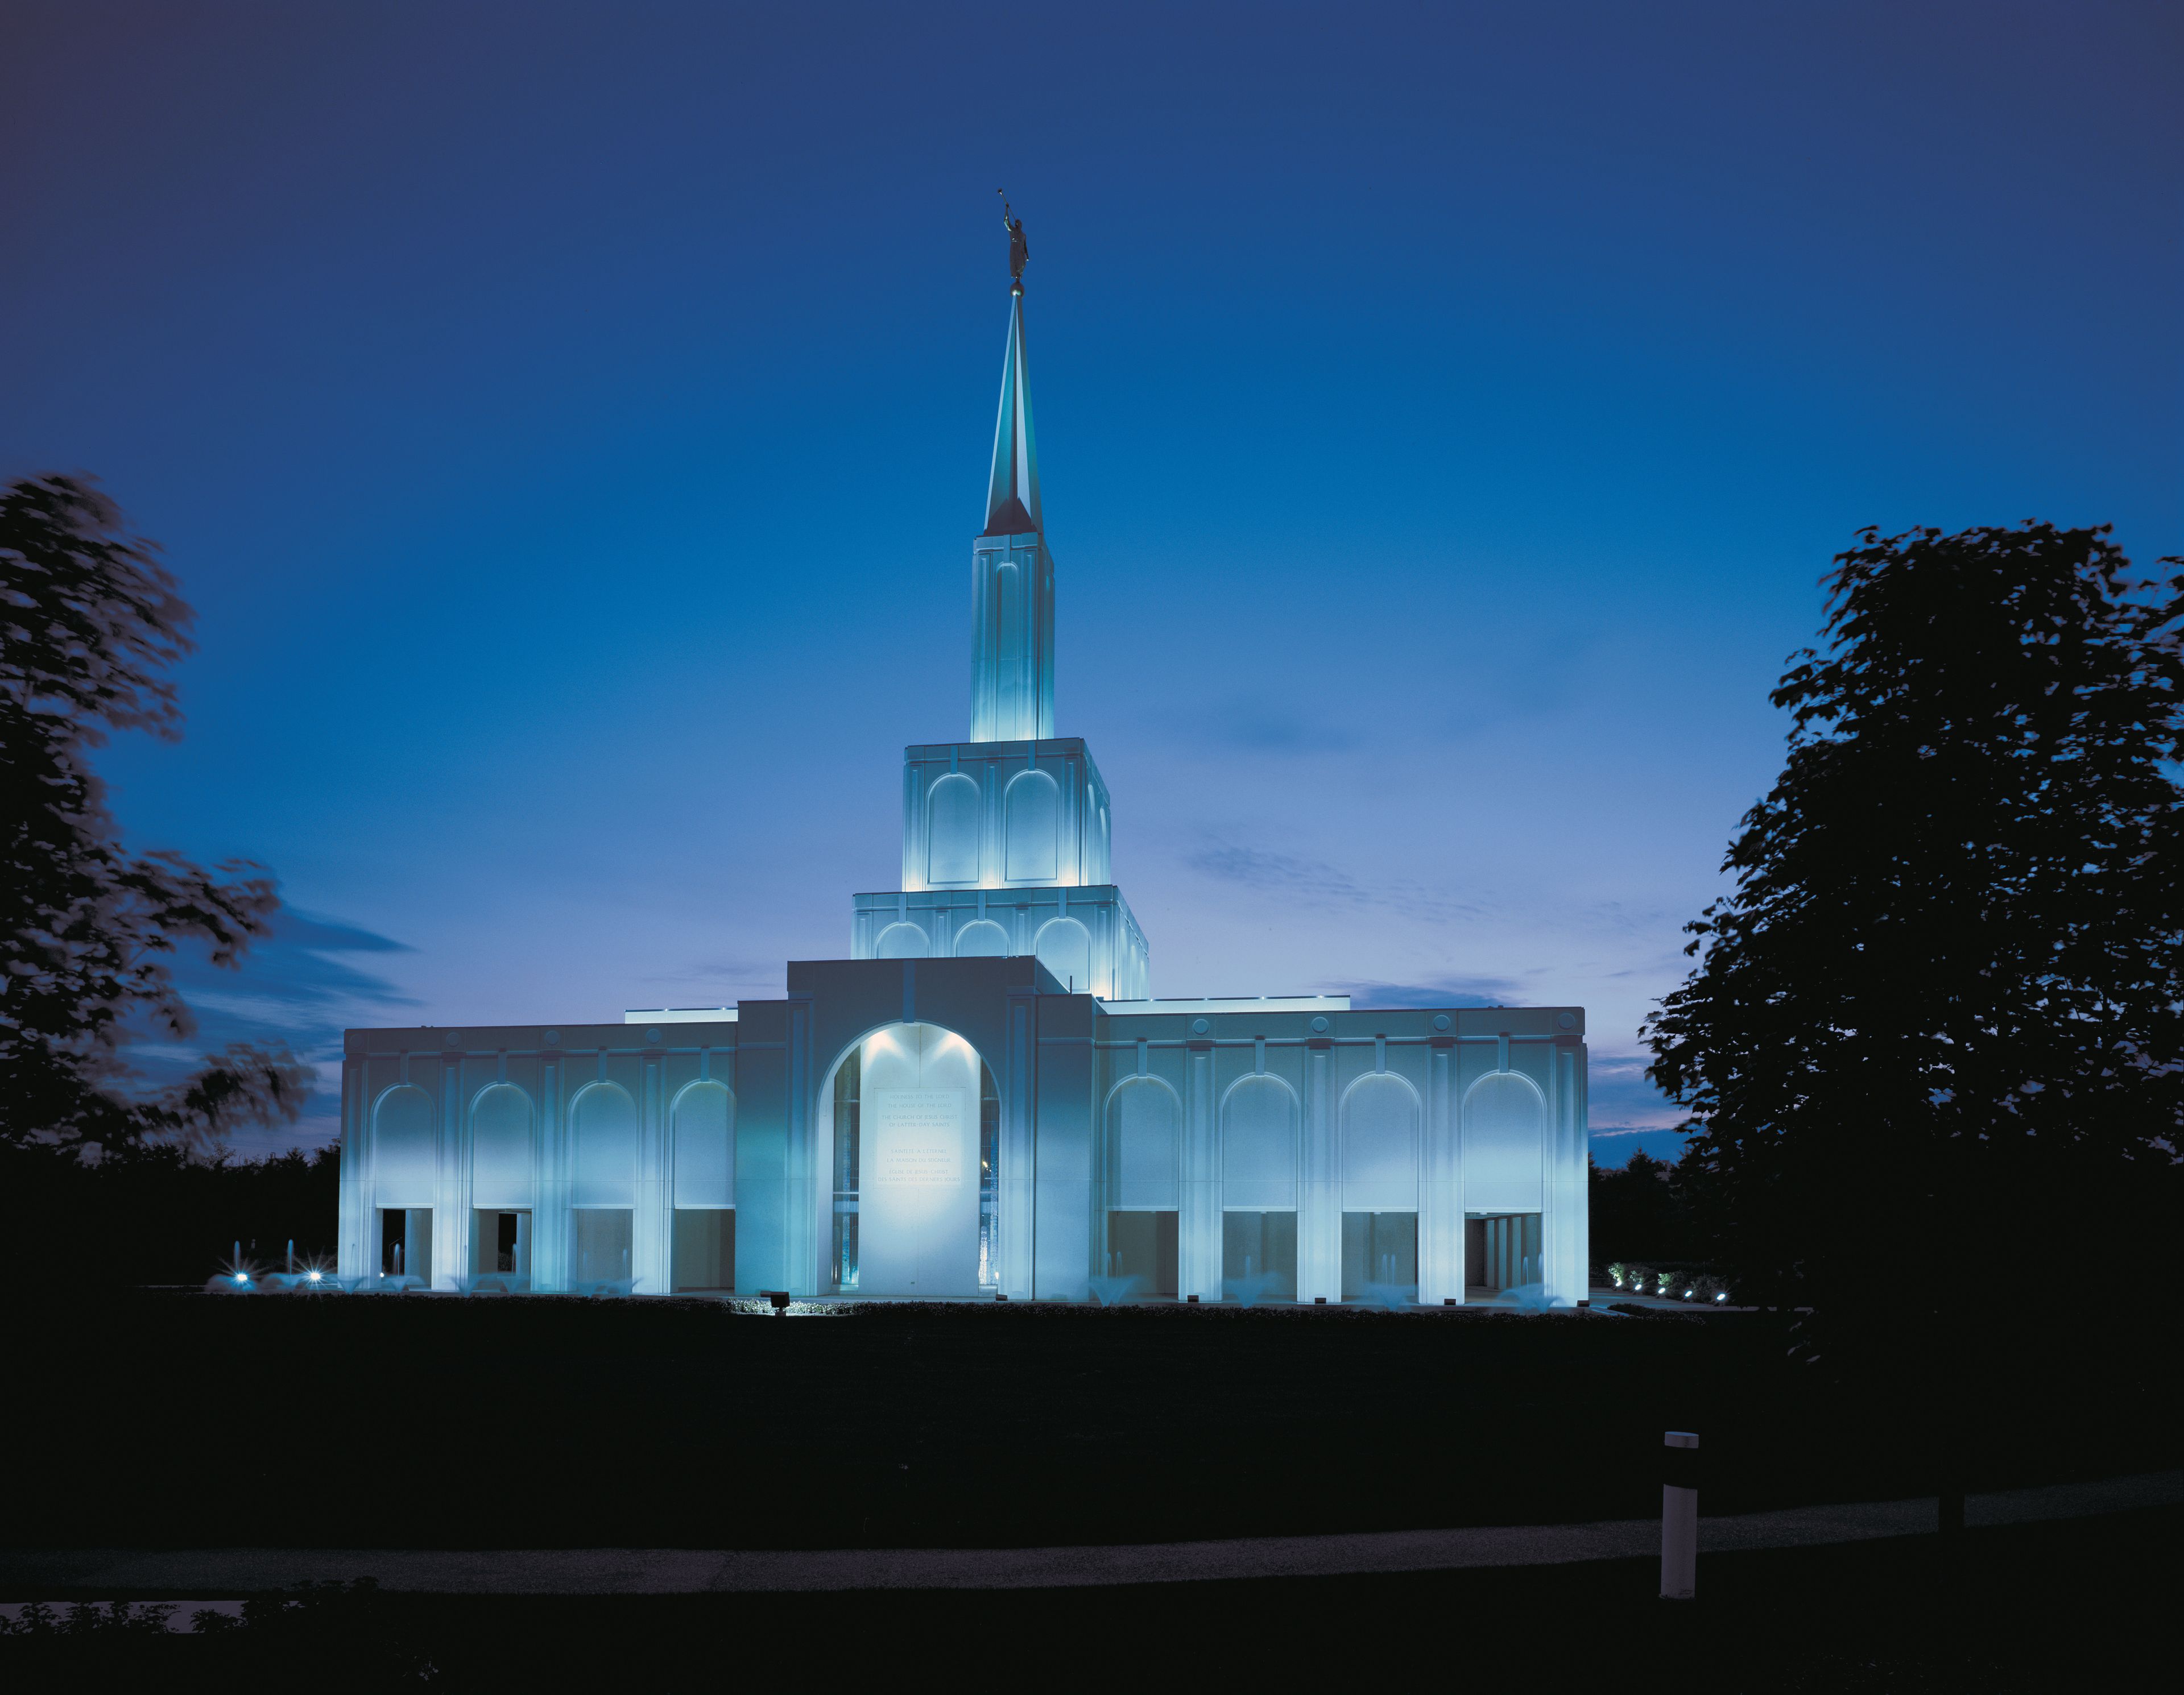 The Toronto Ontario Temple in the evening, including the entrance and scenery.